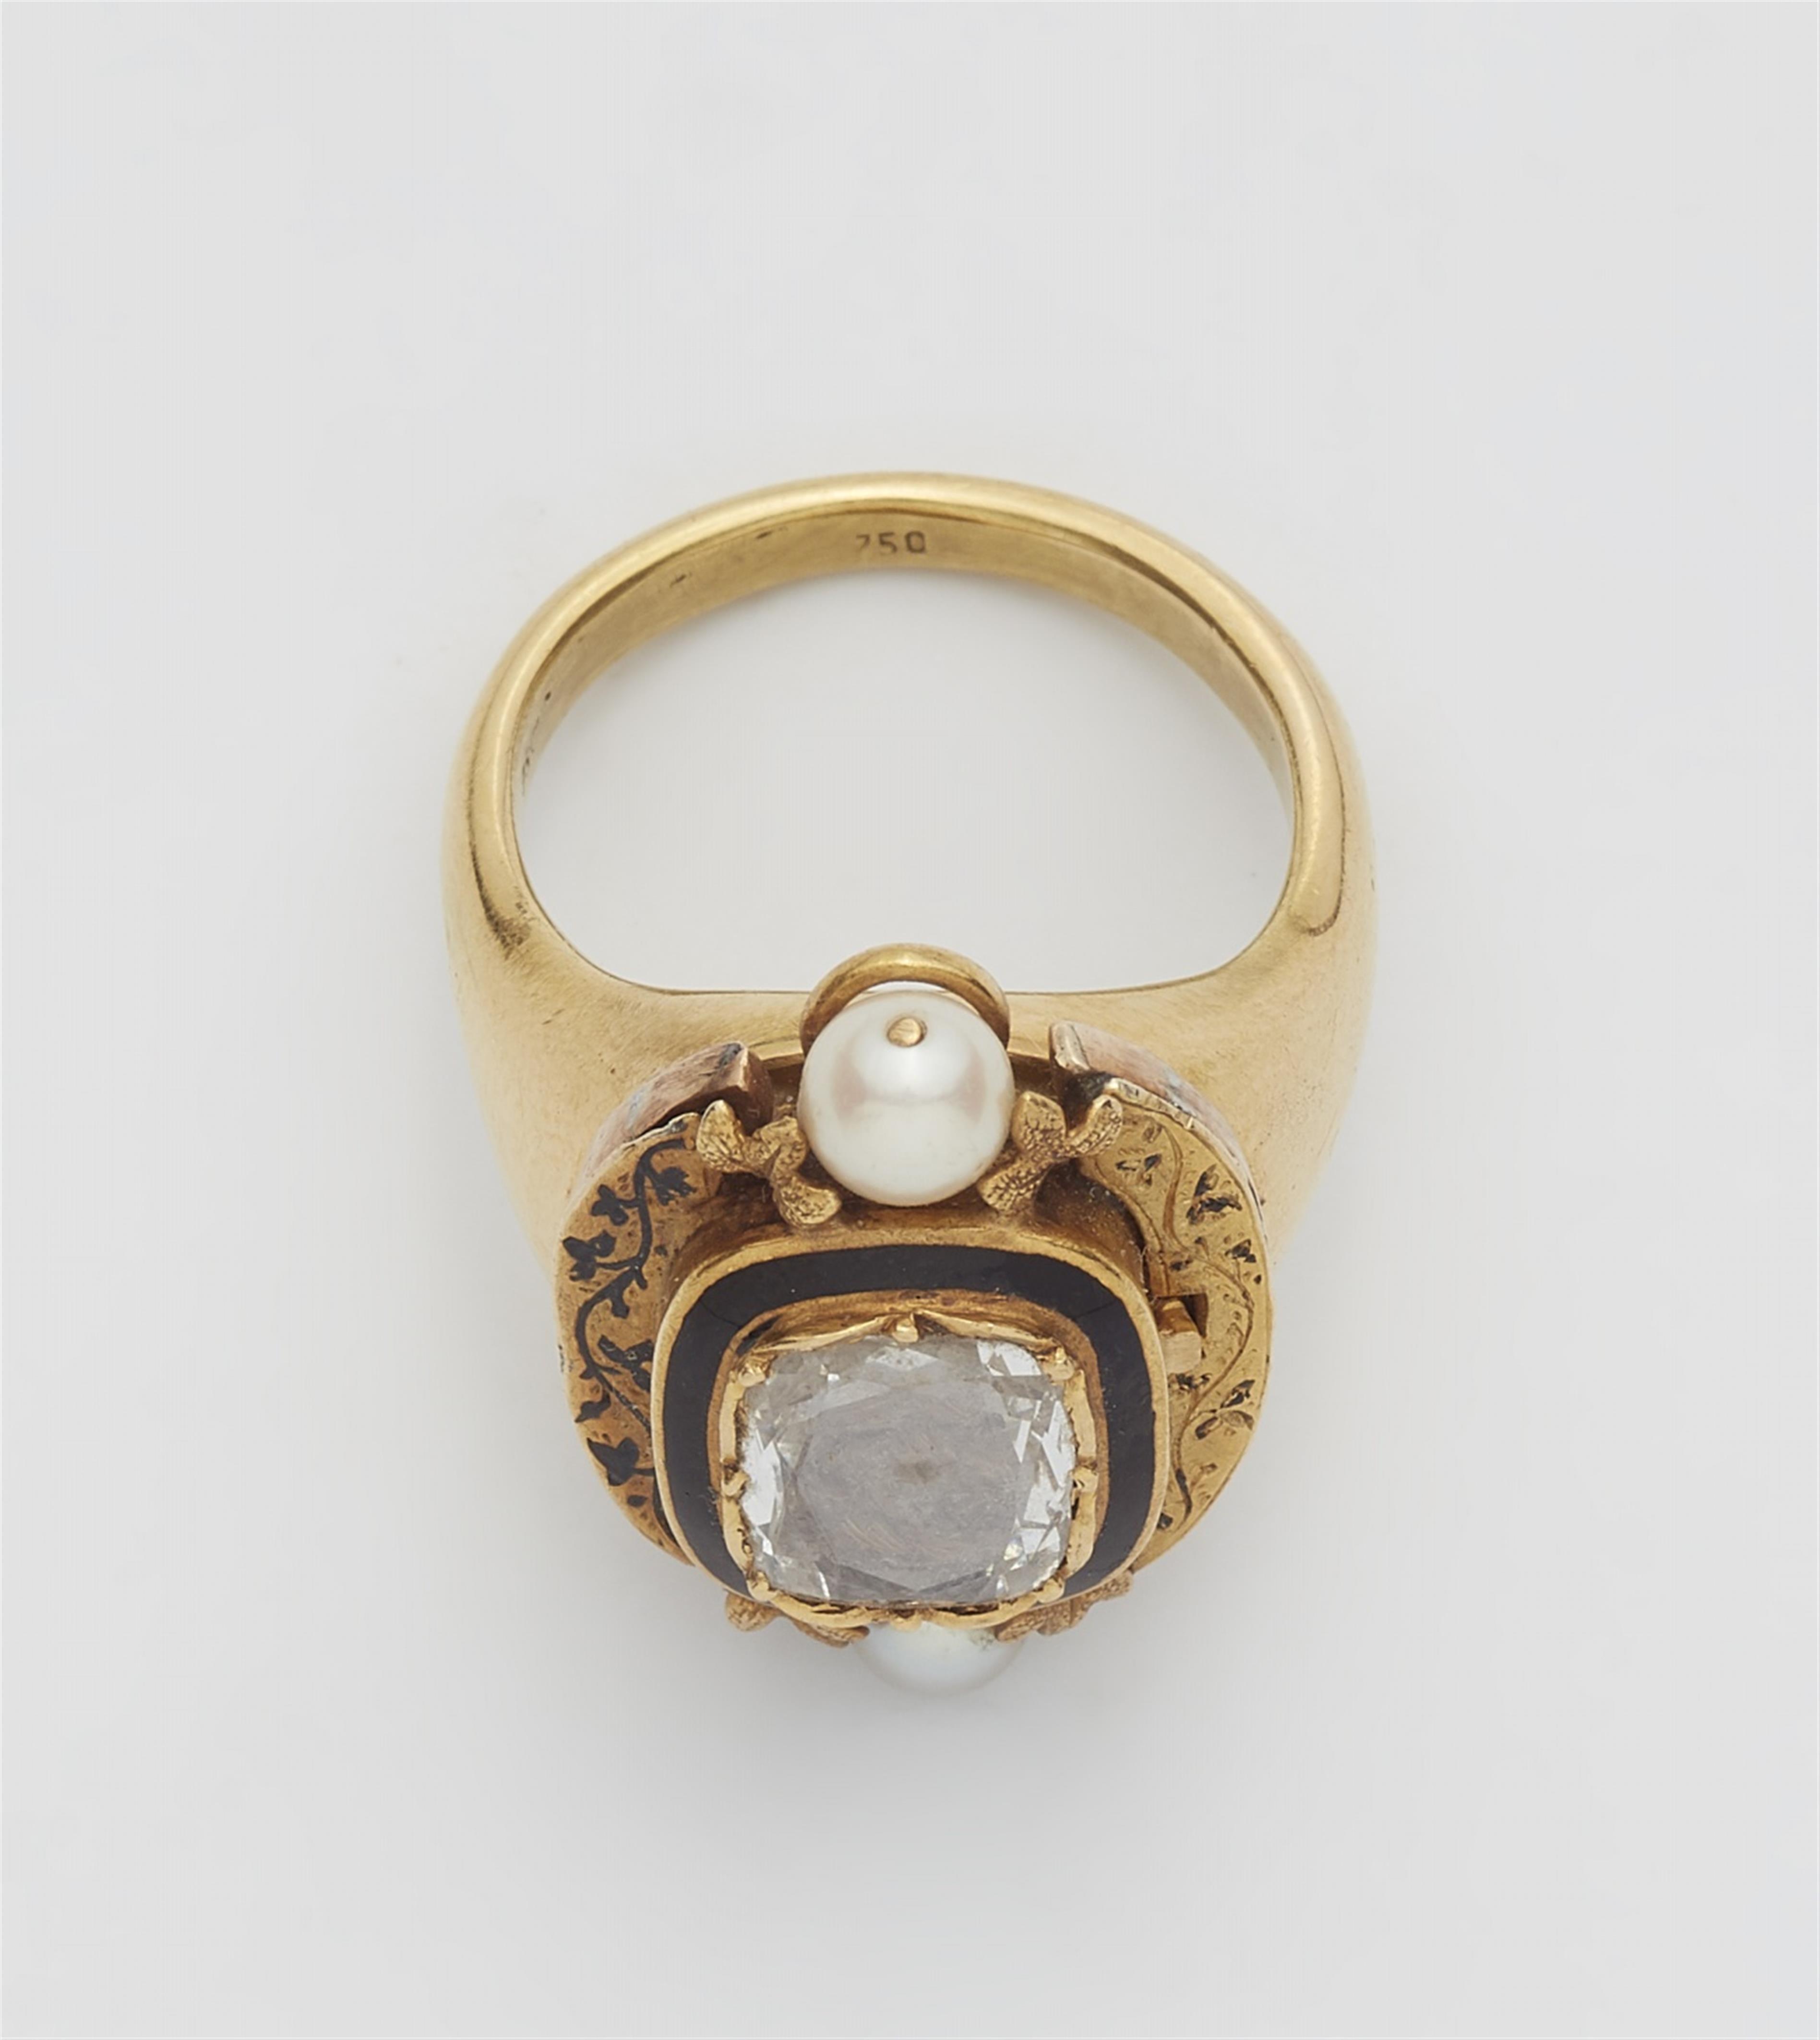 An 18k gold ring with a hairwork miniature - image-2